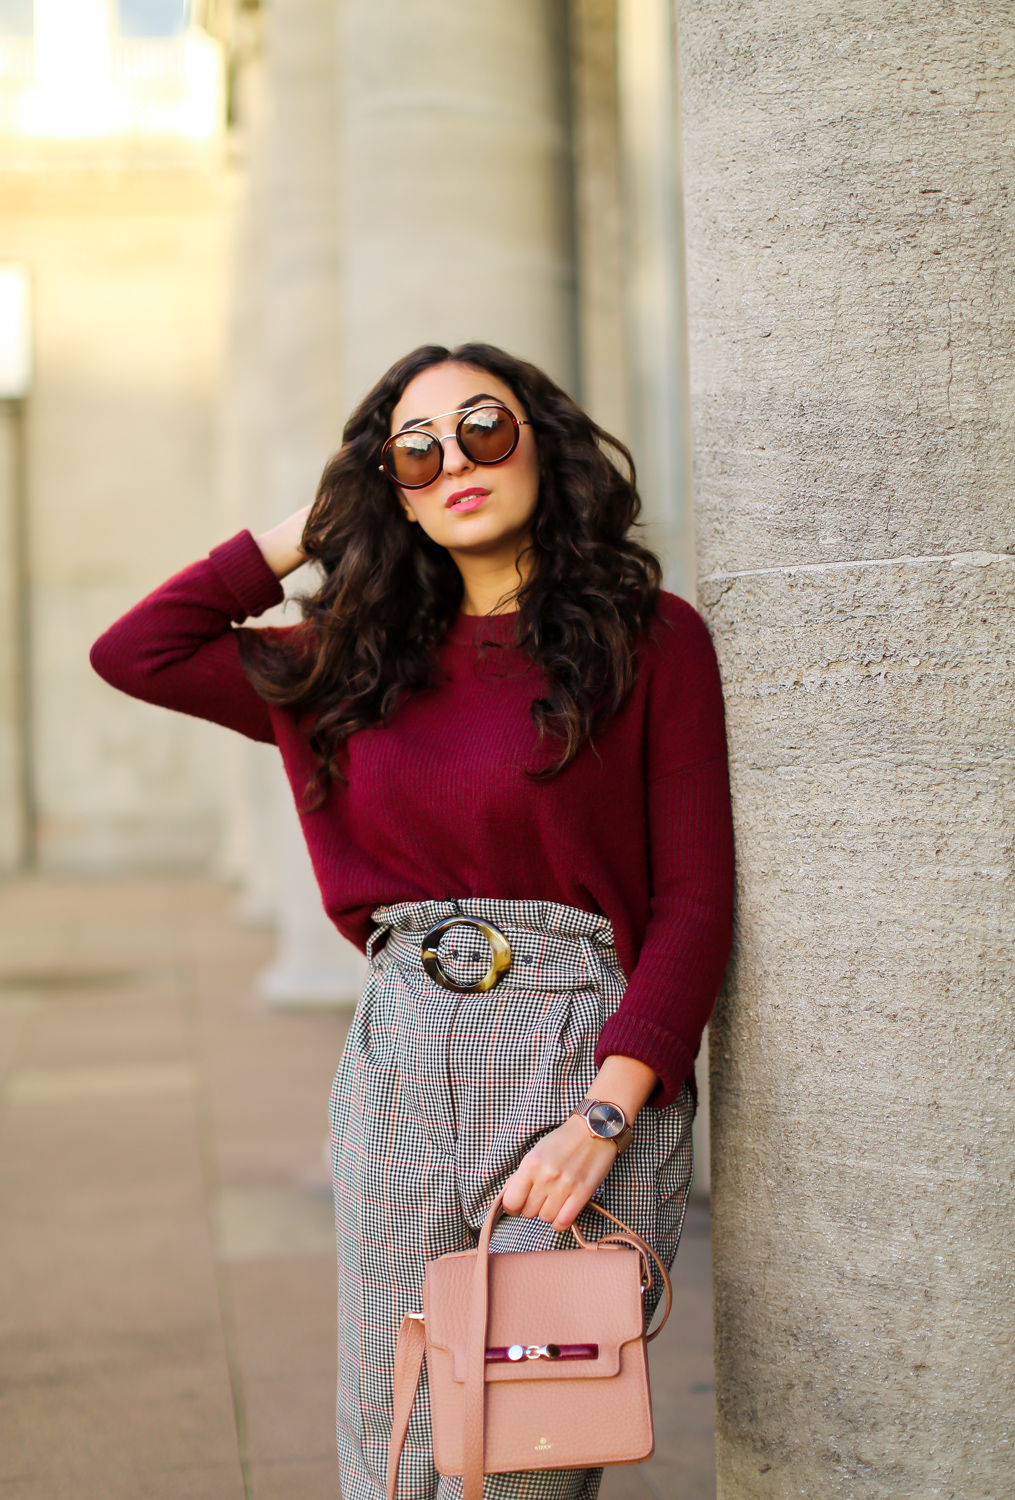 /home/samira/Desktop/Link to 2017/71_karohose/checkered pants/styling checkered pants paper back waist trausers mango winter outfit chic classic retro inspired herbst look streetstyle mode blog samieze berlin_.jpg /home/samira/Desktop/Link to 2017/71_karohose/checkered pants/styling checkered pants paper back waist trausers mango winter outfit chic classic retro inspired herbst look streetstyle mode blog samieze berlin_-2.jpg /home/samira/Desktop/Link to 2017/71_karohose/checkered pants/styling checkered pants paper back waist trausers mango winter outfit chic classic retro inspired herbst look streetstyle mode blog samieze berlin_-3.jpg /home/samira/Desktop/Link to 2017/71_karohose/checkered pants/styling checkered pants paper back waist trausers mango winter outfit chic classic retro inspired herbst look streetstyle mode blog samieze berlin_-4.jpg /home/samira/Desktop/Link to 2017/71_karohose/checkered pants/styling checkered pants paper back waist trausers mango winter outfit chic classic retro inspired herbst look streetstyle mode blog samieze berlin_-5.jpg /home/samira/Desktop/Link to 2017/71_karohose/checkered pants/styling checkered pants paper back waist trausers mango winter outfit chic classic retro inspired herbst look streetstyle mode blog samieze berlin_-6.jpg /home/samira/Desktop/Link to 2017/71_karohose/checkered pants/styling checkered pants paper back waist trausers mango winter outfit chic classic retro inspired herbst look streetstyle mode blog samieze berlin_-7.jpg /home/samira/Desktop/Link to 2017/71_karohose/checkered pants/styling checkered pants paper back waist trausers mango winter outfit chic classic retro inspired herbst look streetstyle mode blog samieze berlin_-8.jpg /home/samira/Desktop/Link to 2017/71_karohose/checkered pants/styling checkered pants paper back waist trausers mango winter outfit chic classic retro inspired herbst look streetstyle mode blog samieze berlin_-9.jpg /home/samira/Desktop/Link to 2017/71_karohose/checkered pants/styling checkered pants paper back waist trausers mango winter outfit chic classic retro inspired herbst look streetstyle mode blog samieze berlin_-10.jpg /home/samira/Desktop/Link to 2017/71_karohose/checkered pants/styling checkered pants paper back waist trausers mango winter outfit chic classic retro inspired herbst look streetstyle mode blog samieze berlin_-11.jpg